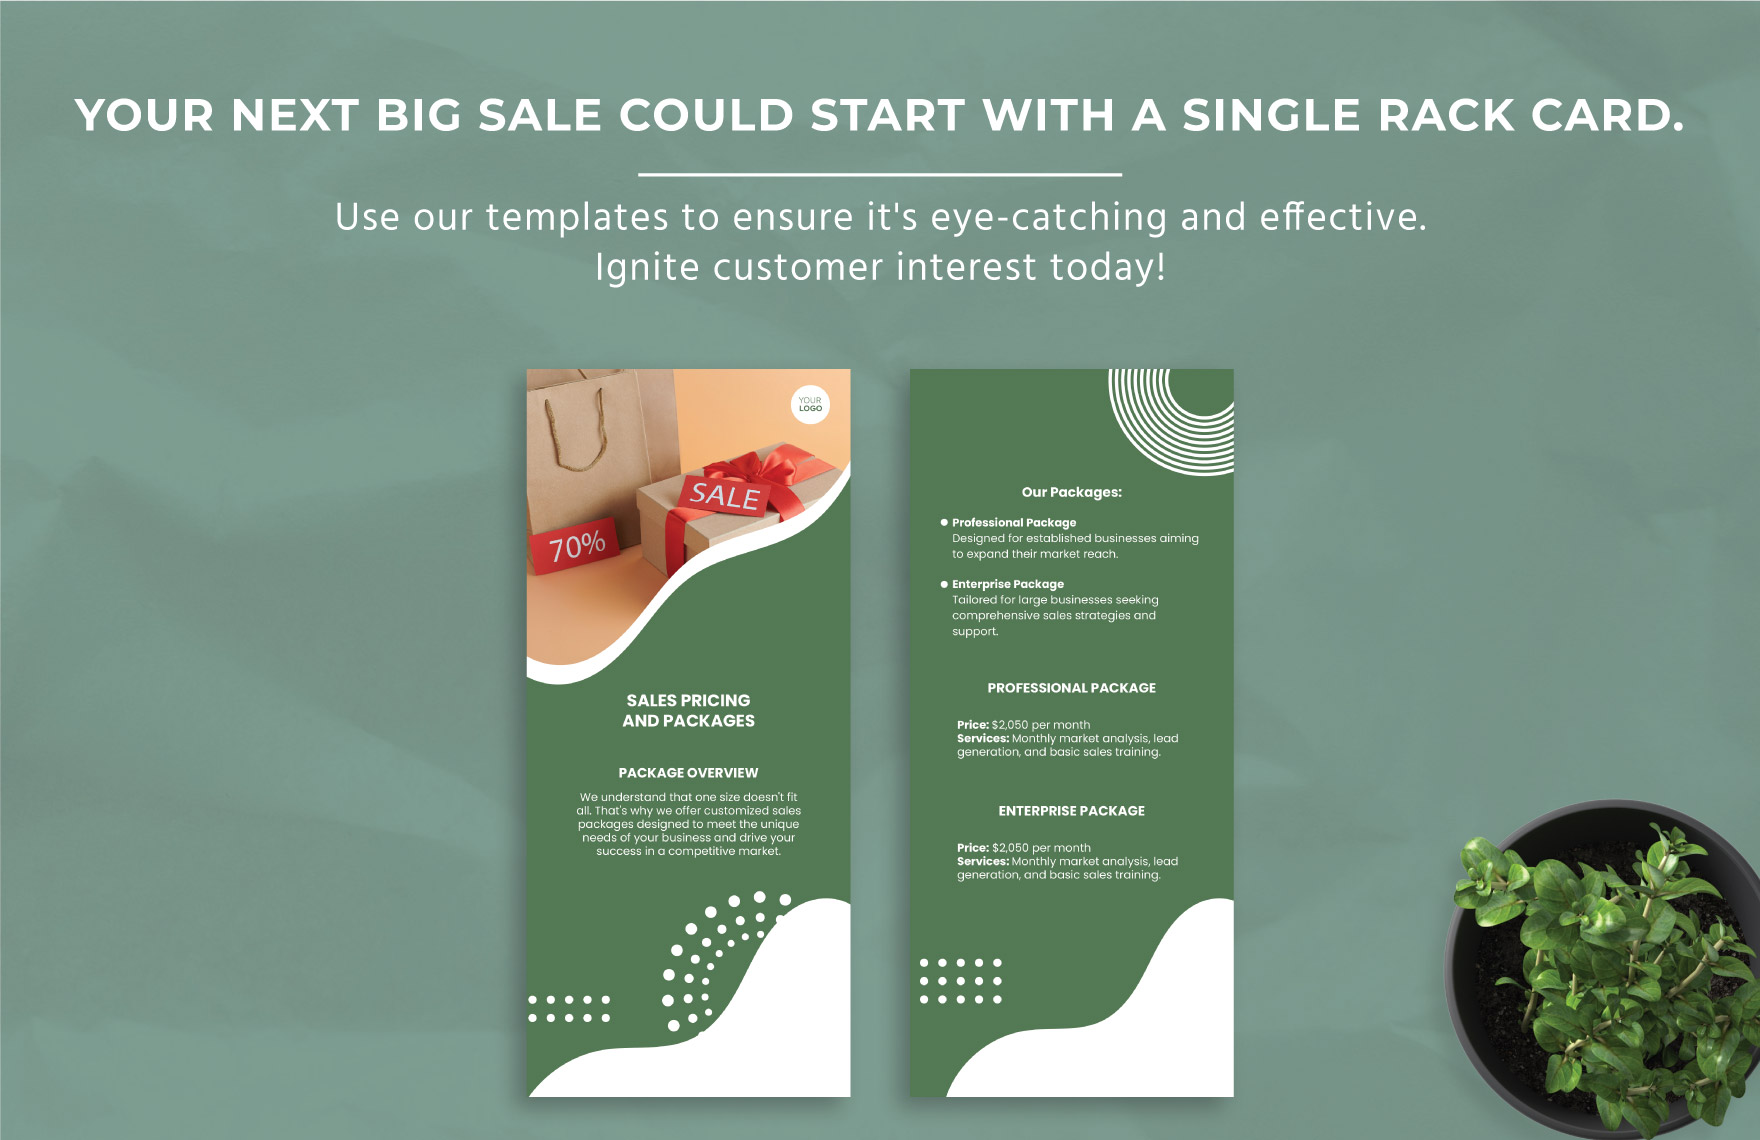 Sales Pricing and Packages Rack Card Template